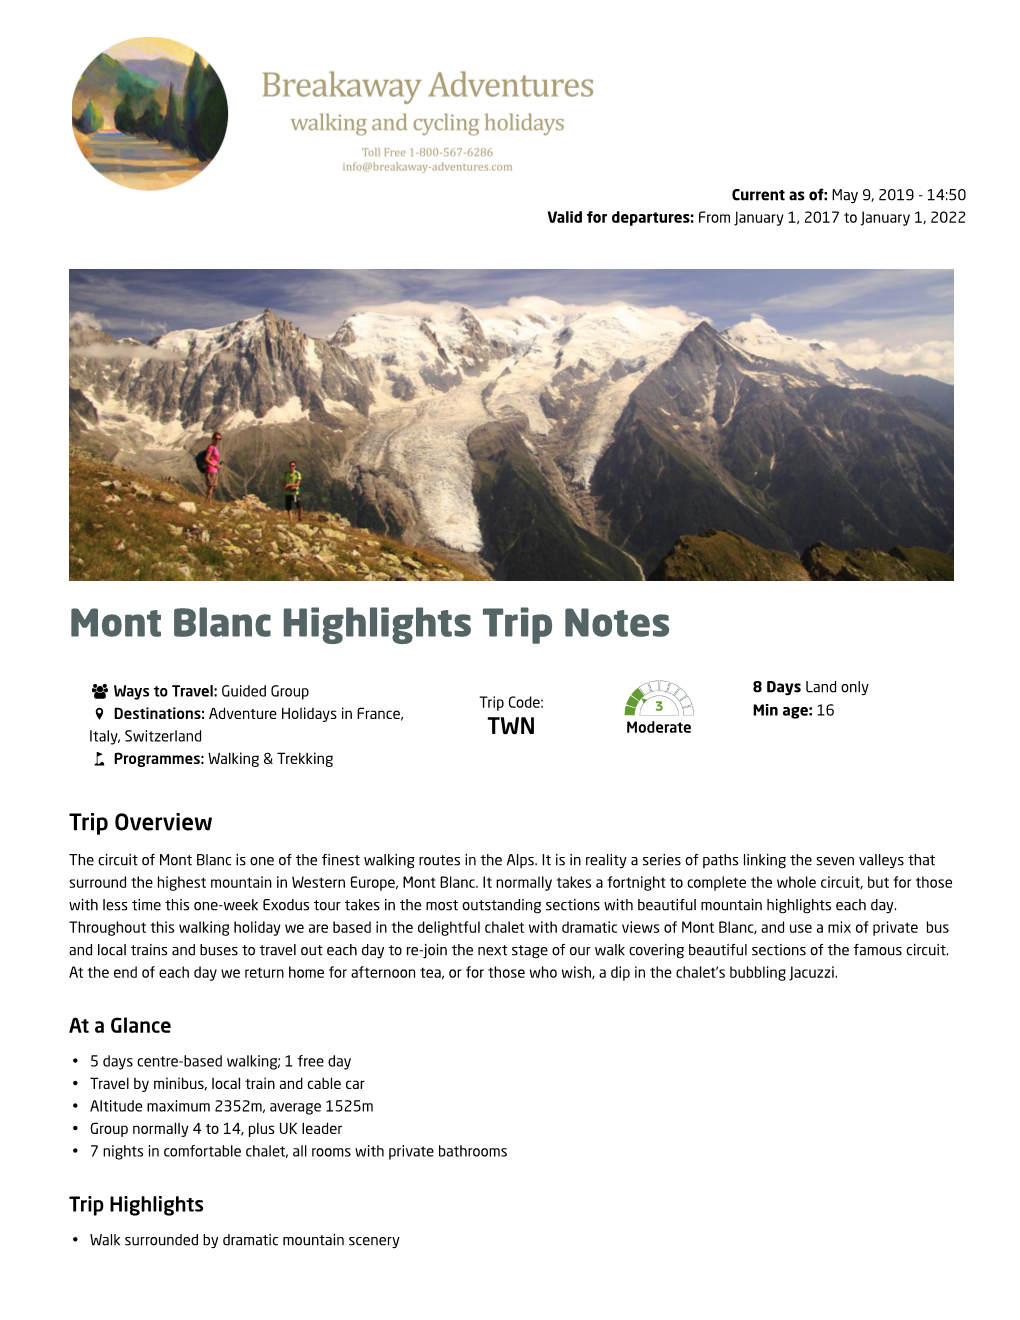 Mont Blanc Highlights Trip Notes